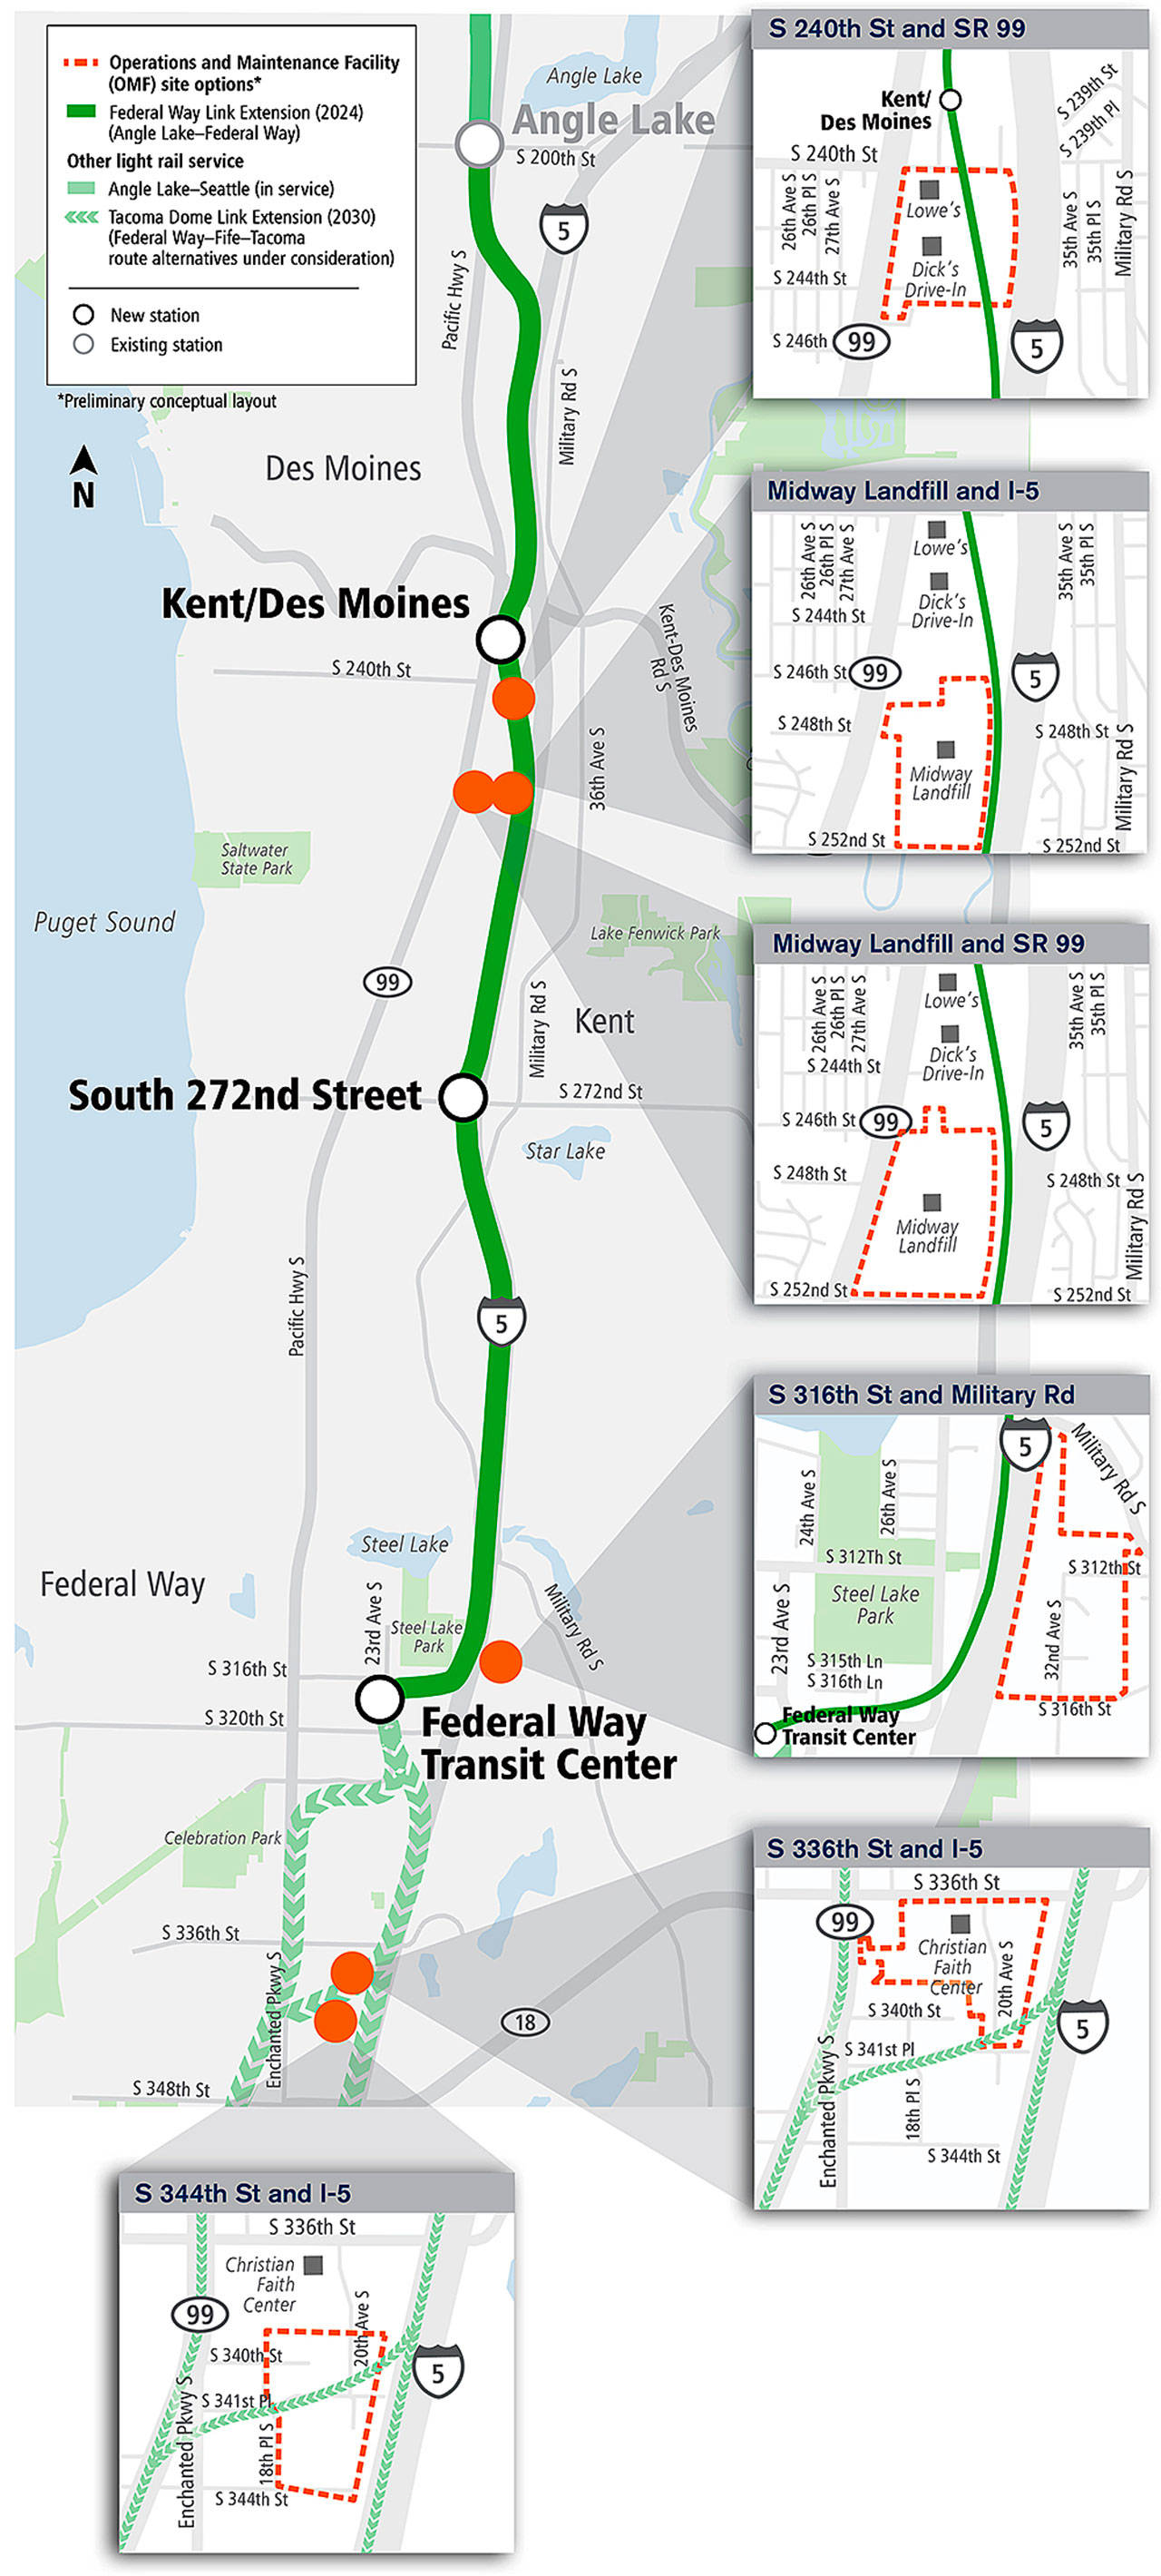 Sites under consideration by Sound Transit for a light rail vehicle Operations and Maintenance Facility. COURTESY GRAPHIC, Sound Transit